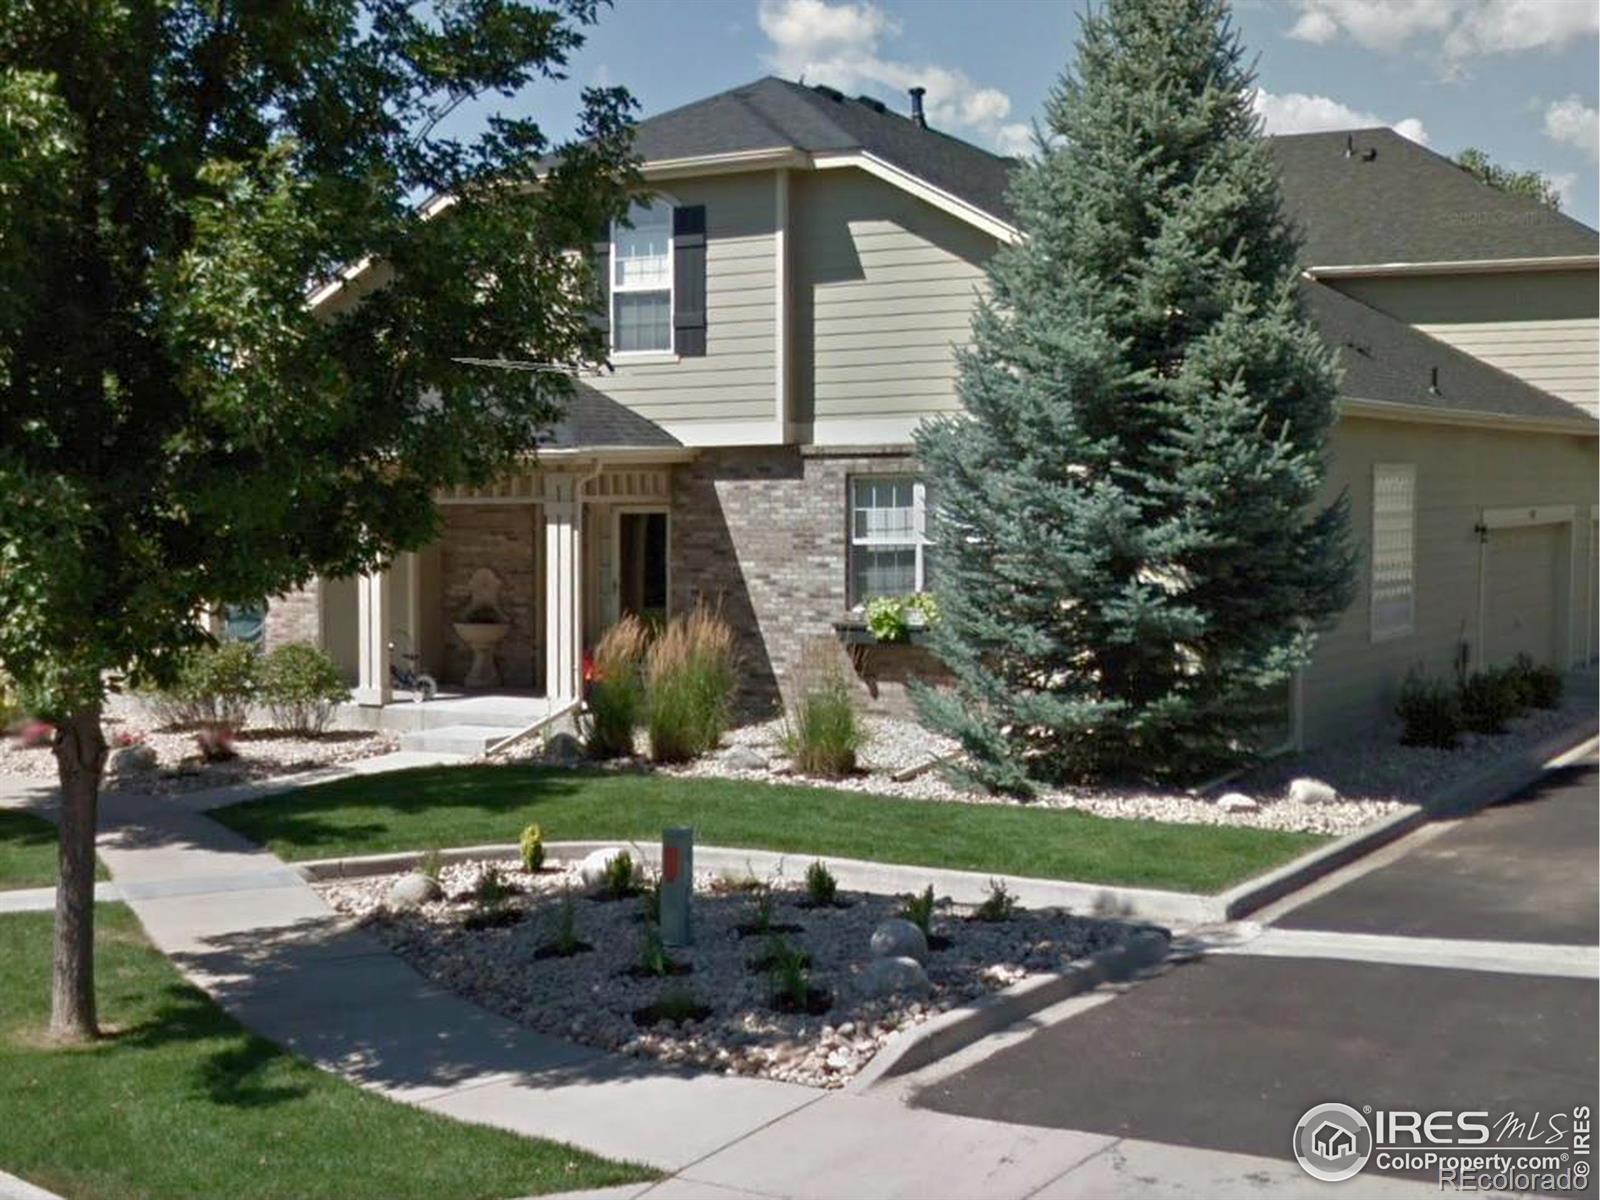 5403  Mill Stone Way, fort collins MLS: 4567891007200 Beds: 3 Baths: 4 Price: $600,000